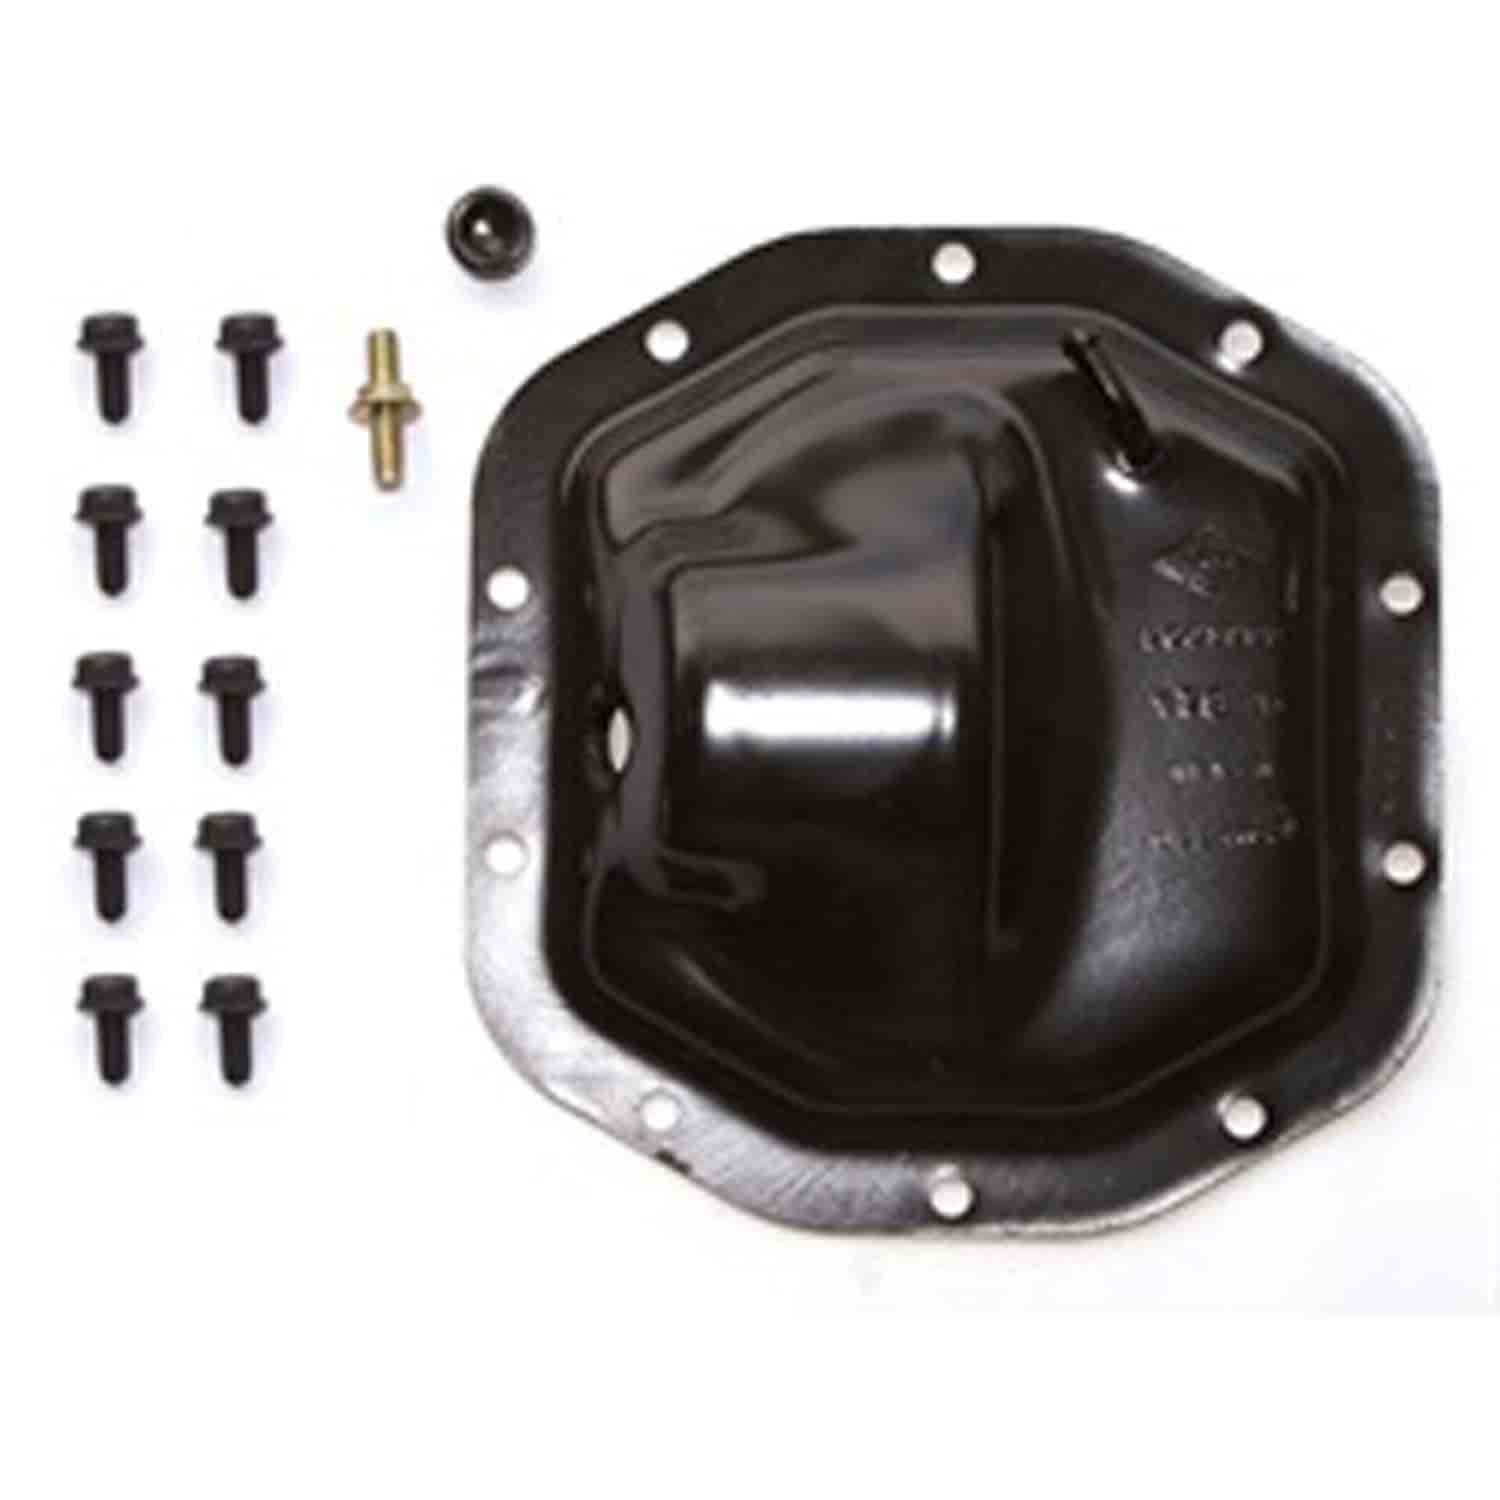 Diff Cover Kit for Dana 30 2002-2007 Jeep Liberty KJ By Omix-ADA